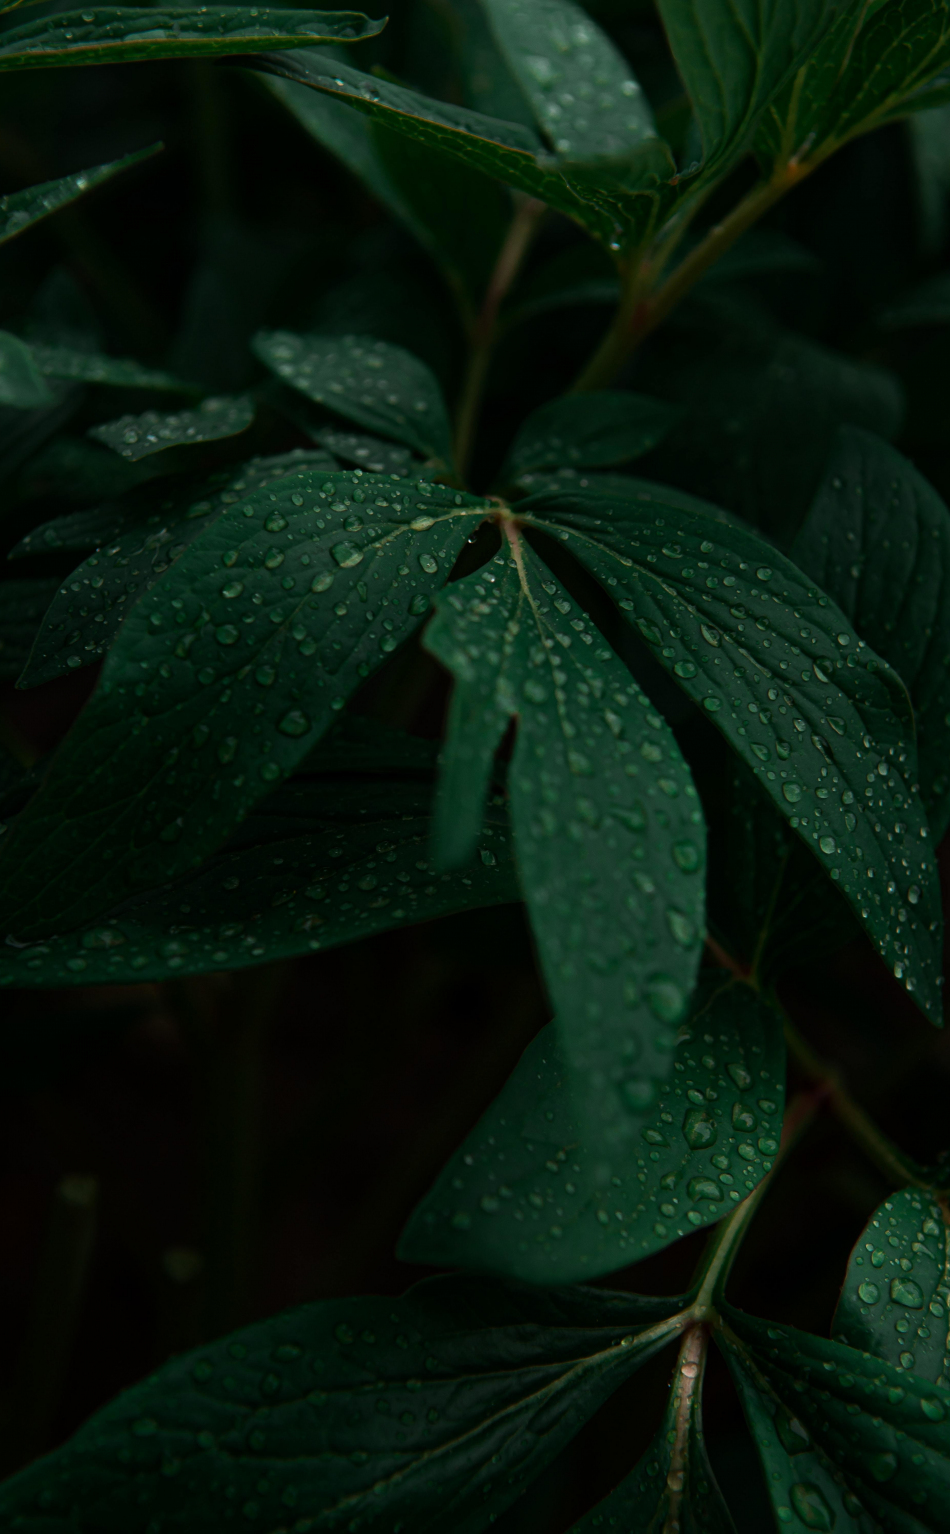 Download wallpaper 950x1534 droplets on leaves, drops, plant, iphone ...